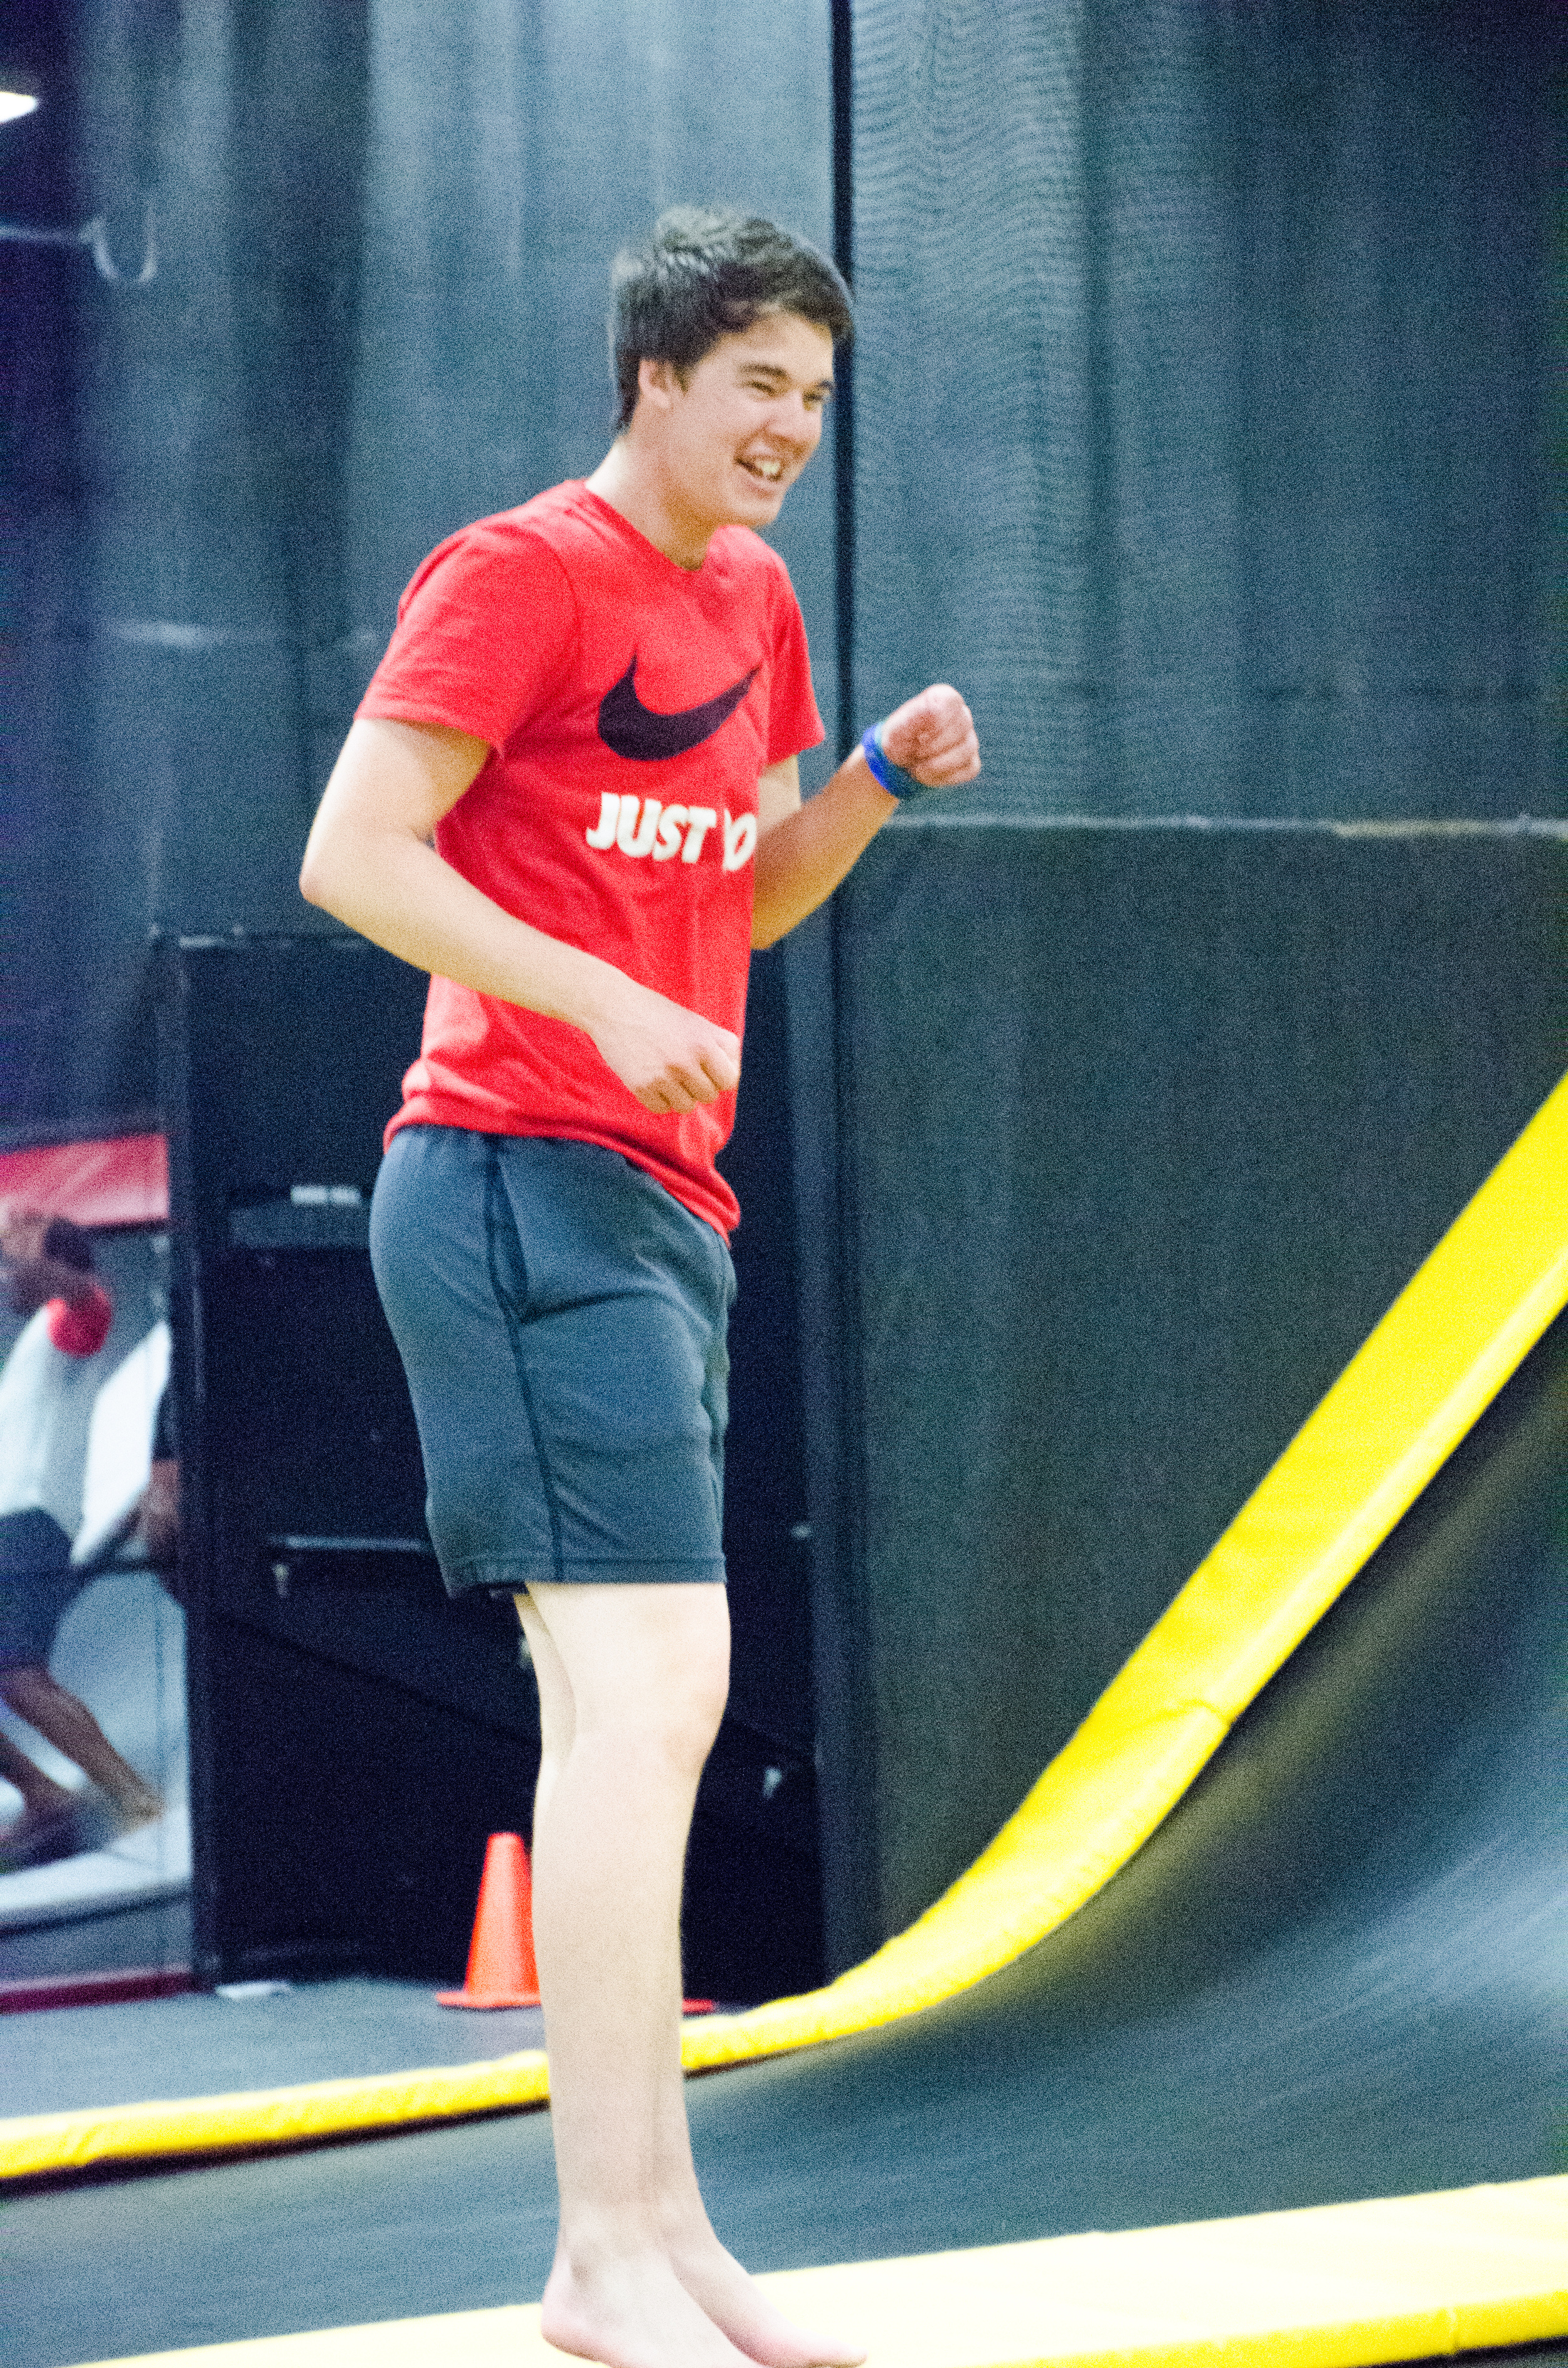 Josh Leister laughs with his friends while jumping on the trampolines.&nbsp;